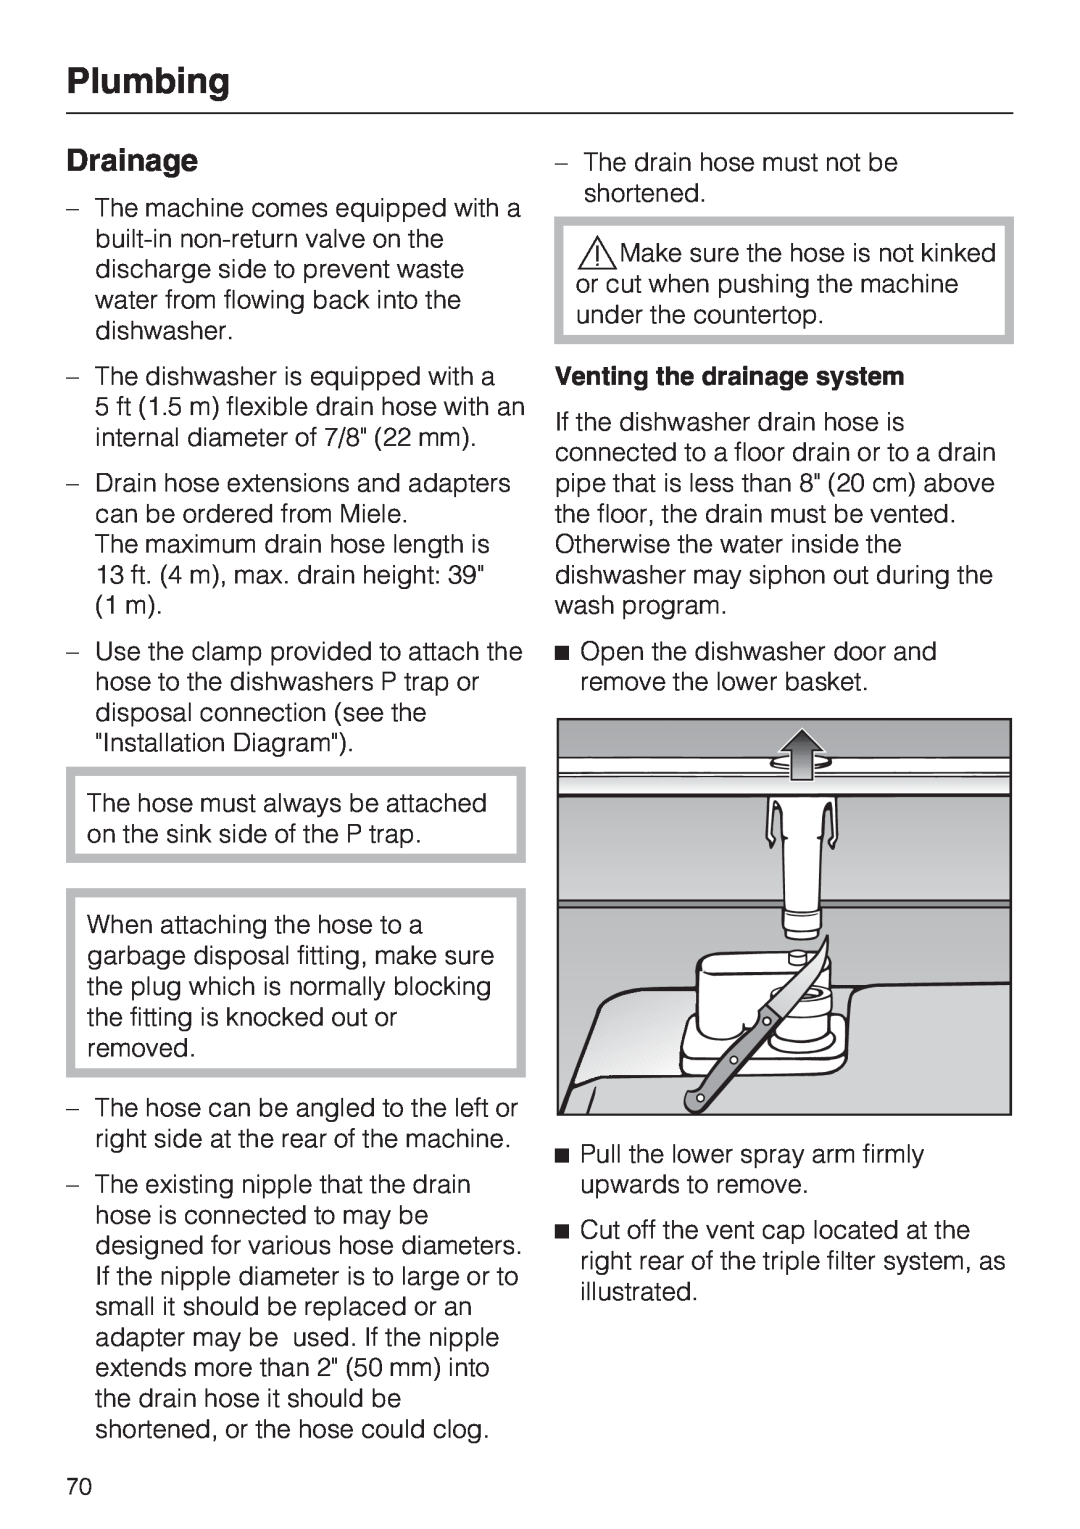 Miele G 5570, G 5575 operating instructions Drainage, Plumbing, Venting the drainage system 